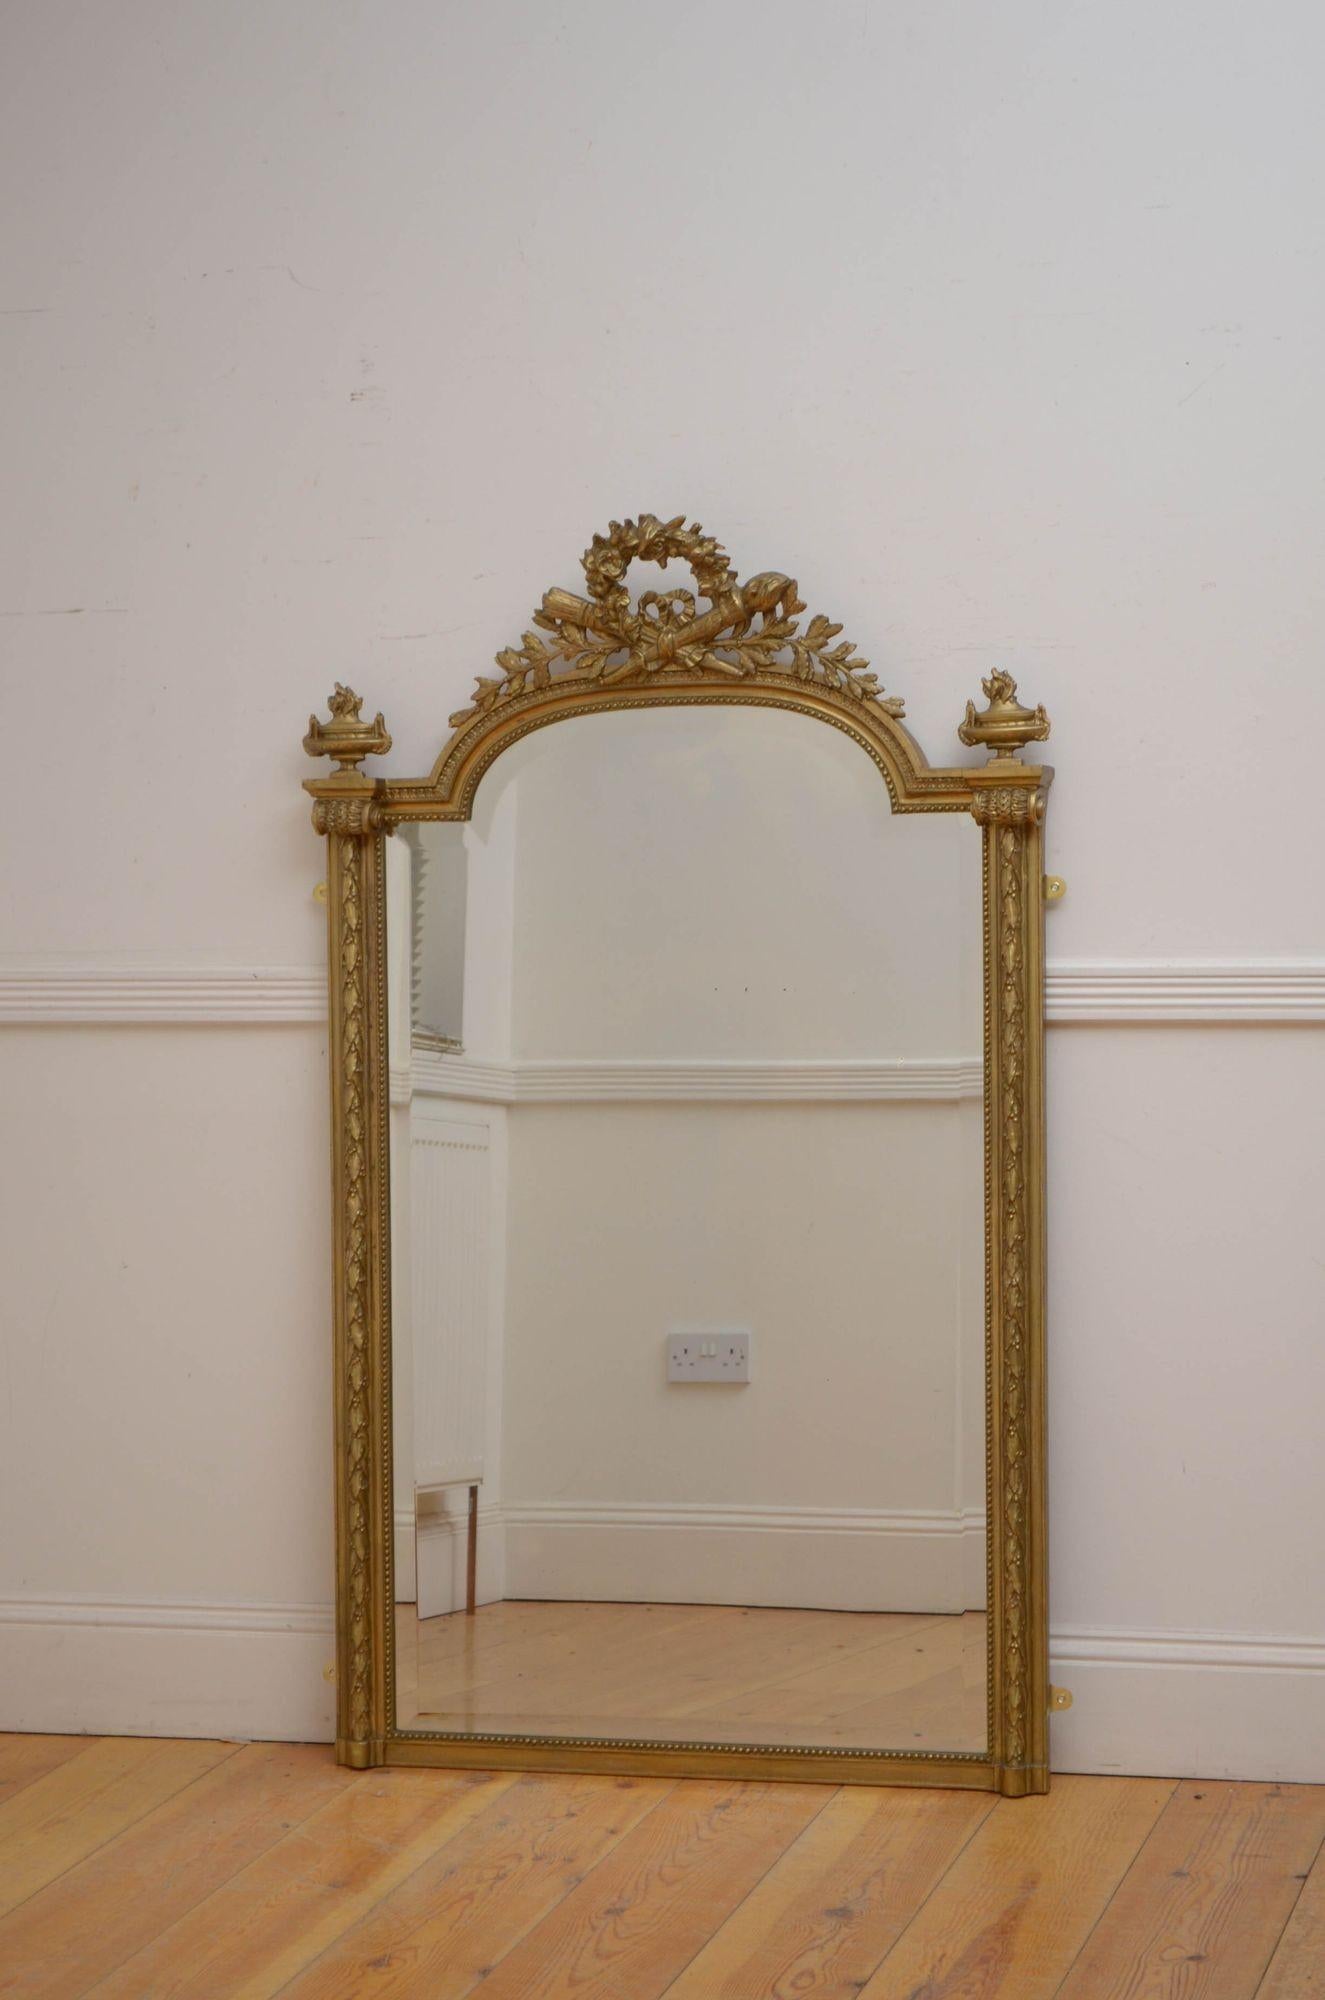 Sn5391 fine 19th century French giltwood wall mirror of slim proportions, having original bevelled edge glass with minor imperfections in gilded frame with laurel leaf carving, beaded edge and leaf decorated crest flanked by two urns. This antique